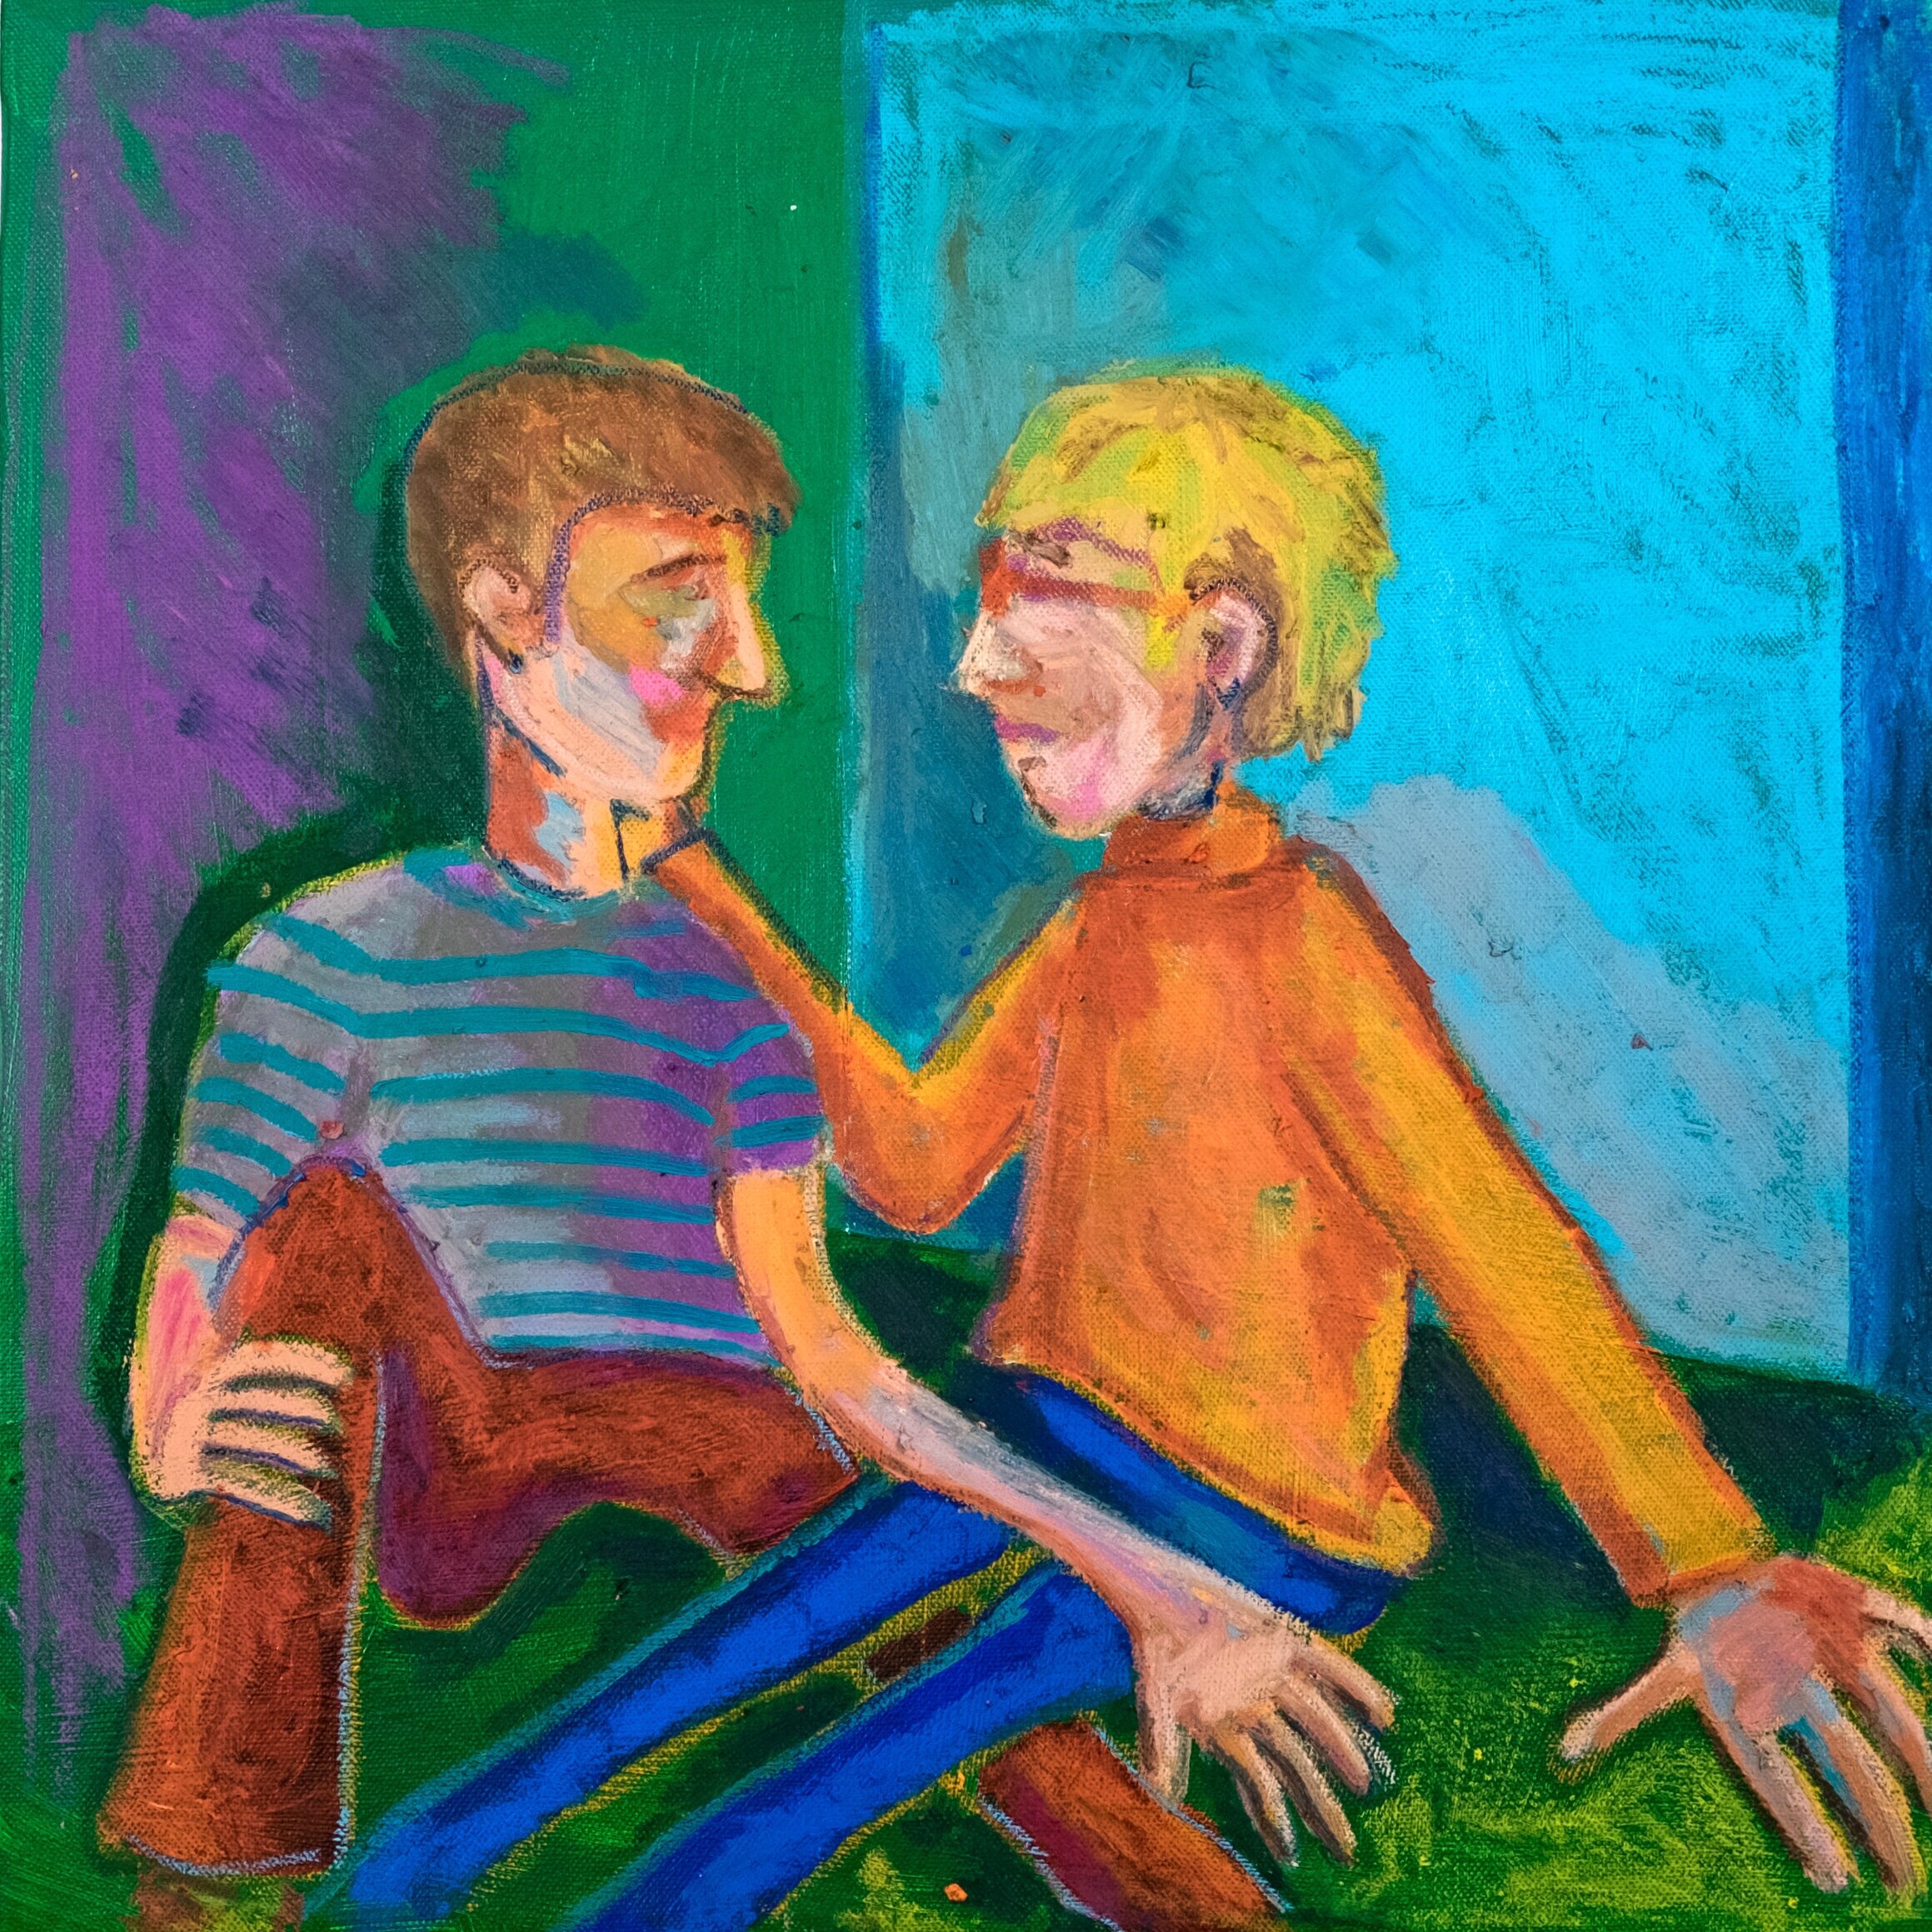   Two Boys in Love   Acrylic Paint and Oil Pastel on Canvas  2018  16 inches x 16 inches 